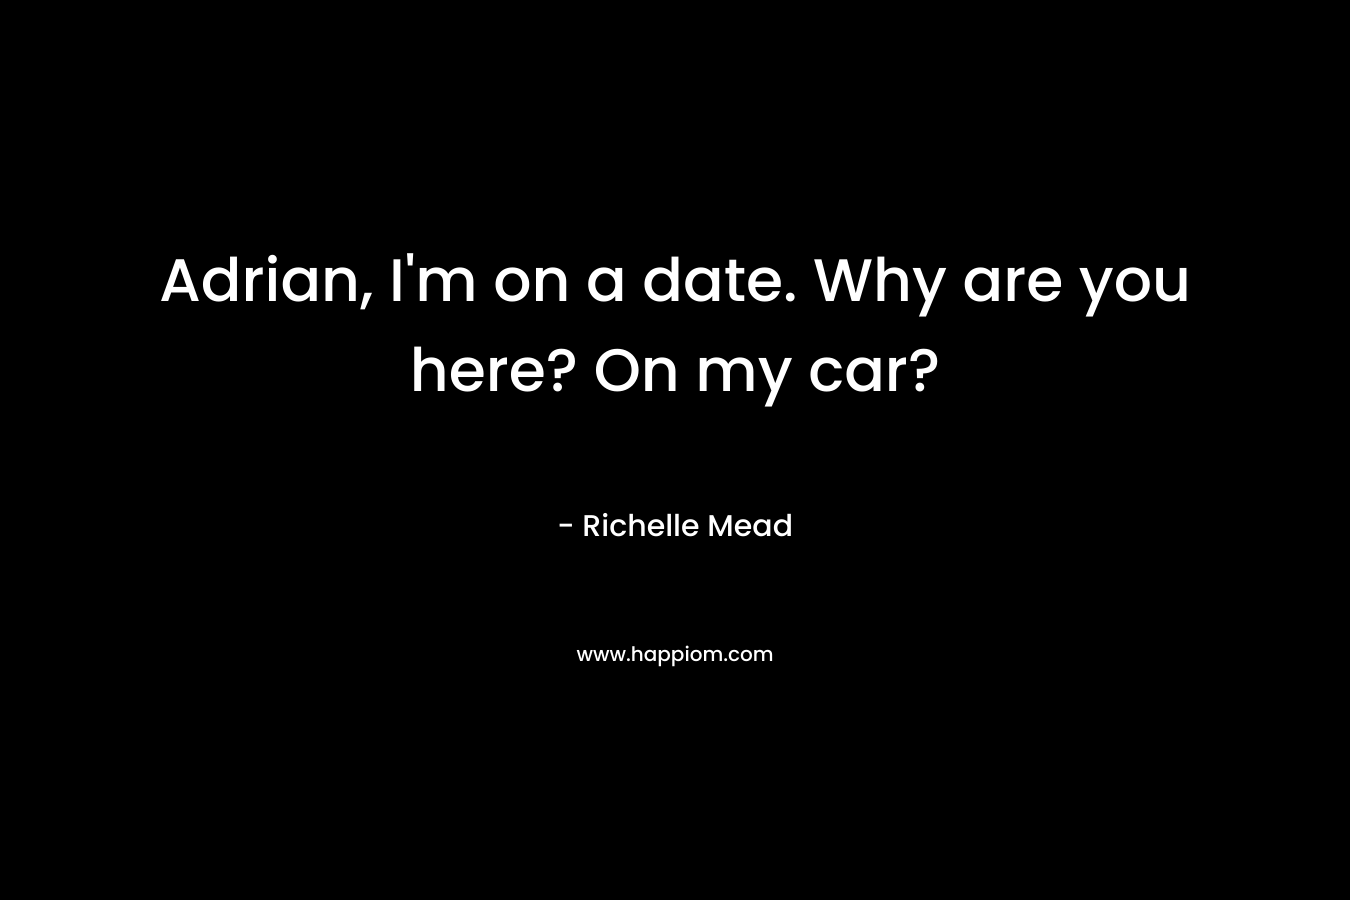 Adrian, I'm on a date. Why are you here? On my car?